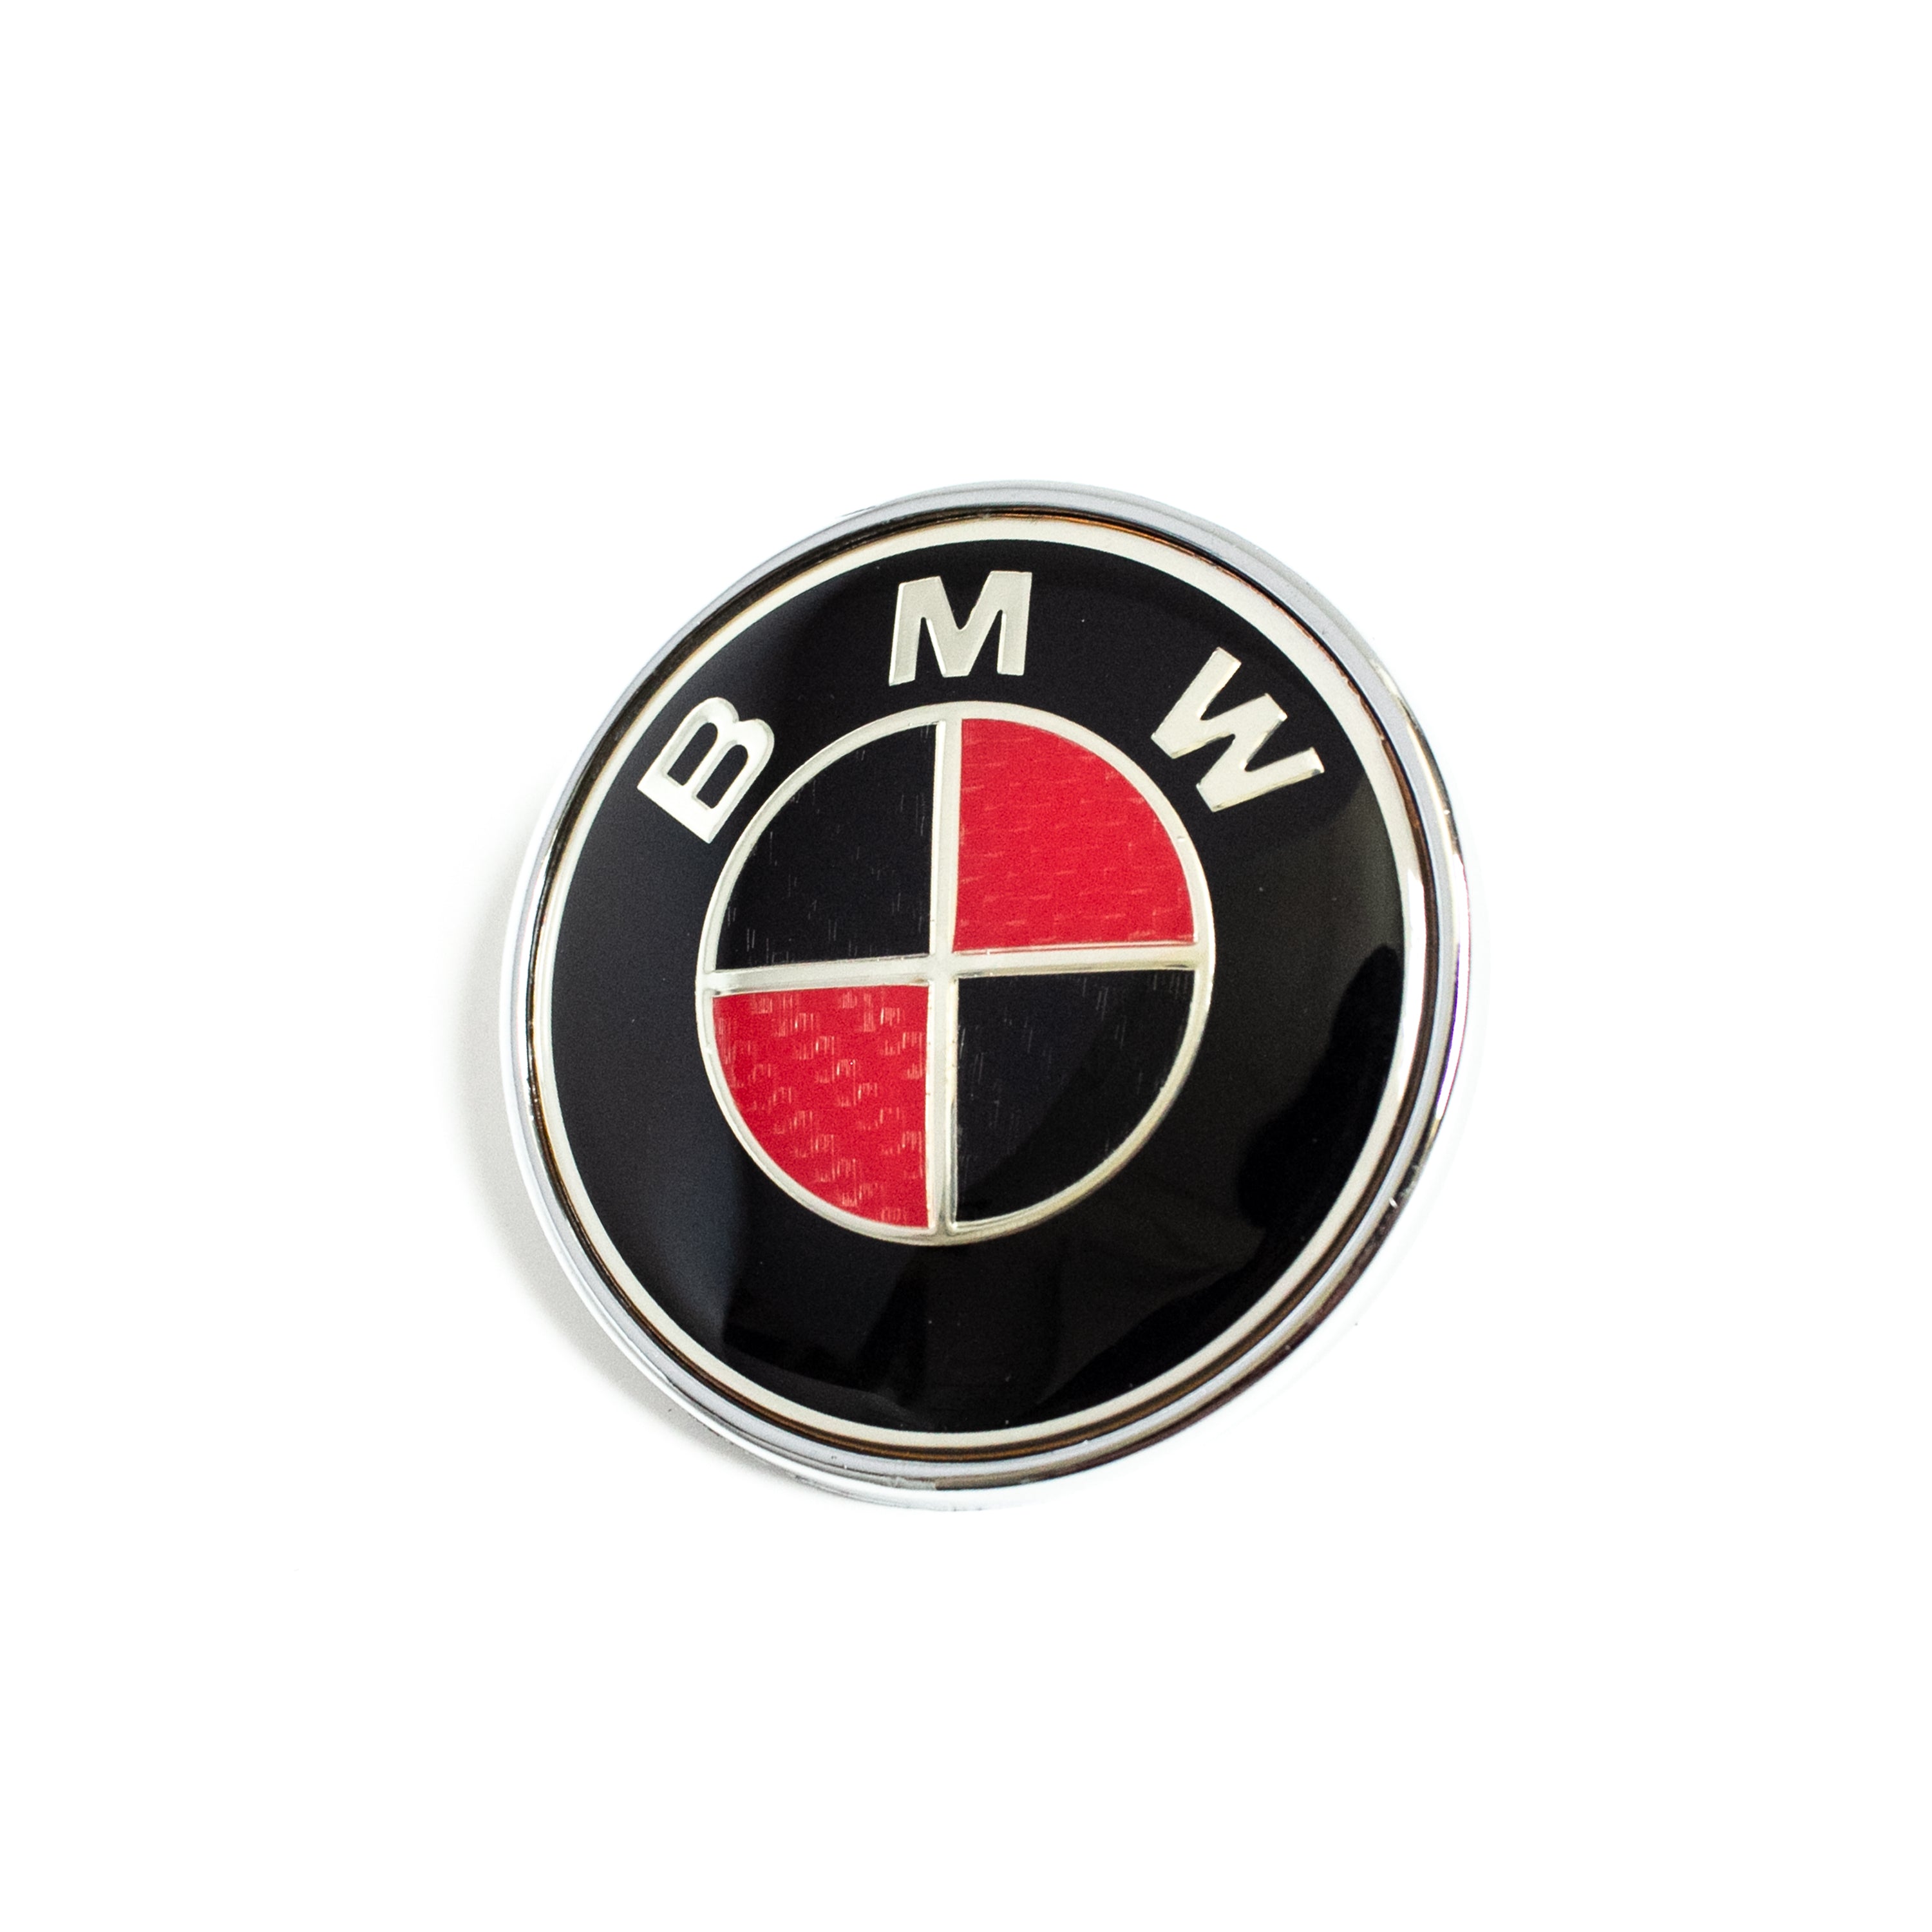 Black Dream On Walls Dashing Bmw Car Wall Decal at Rs 487/piece in